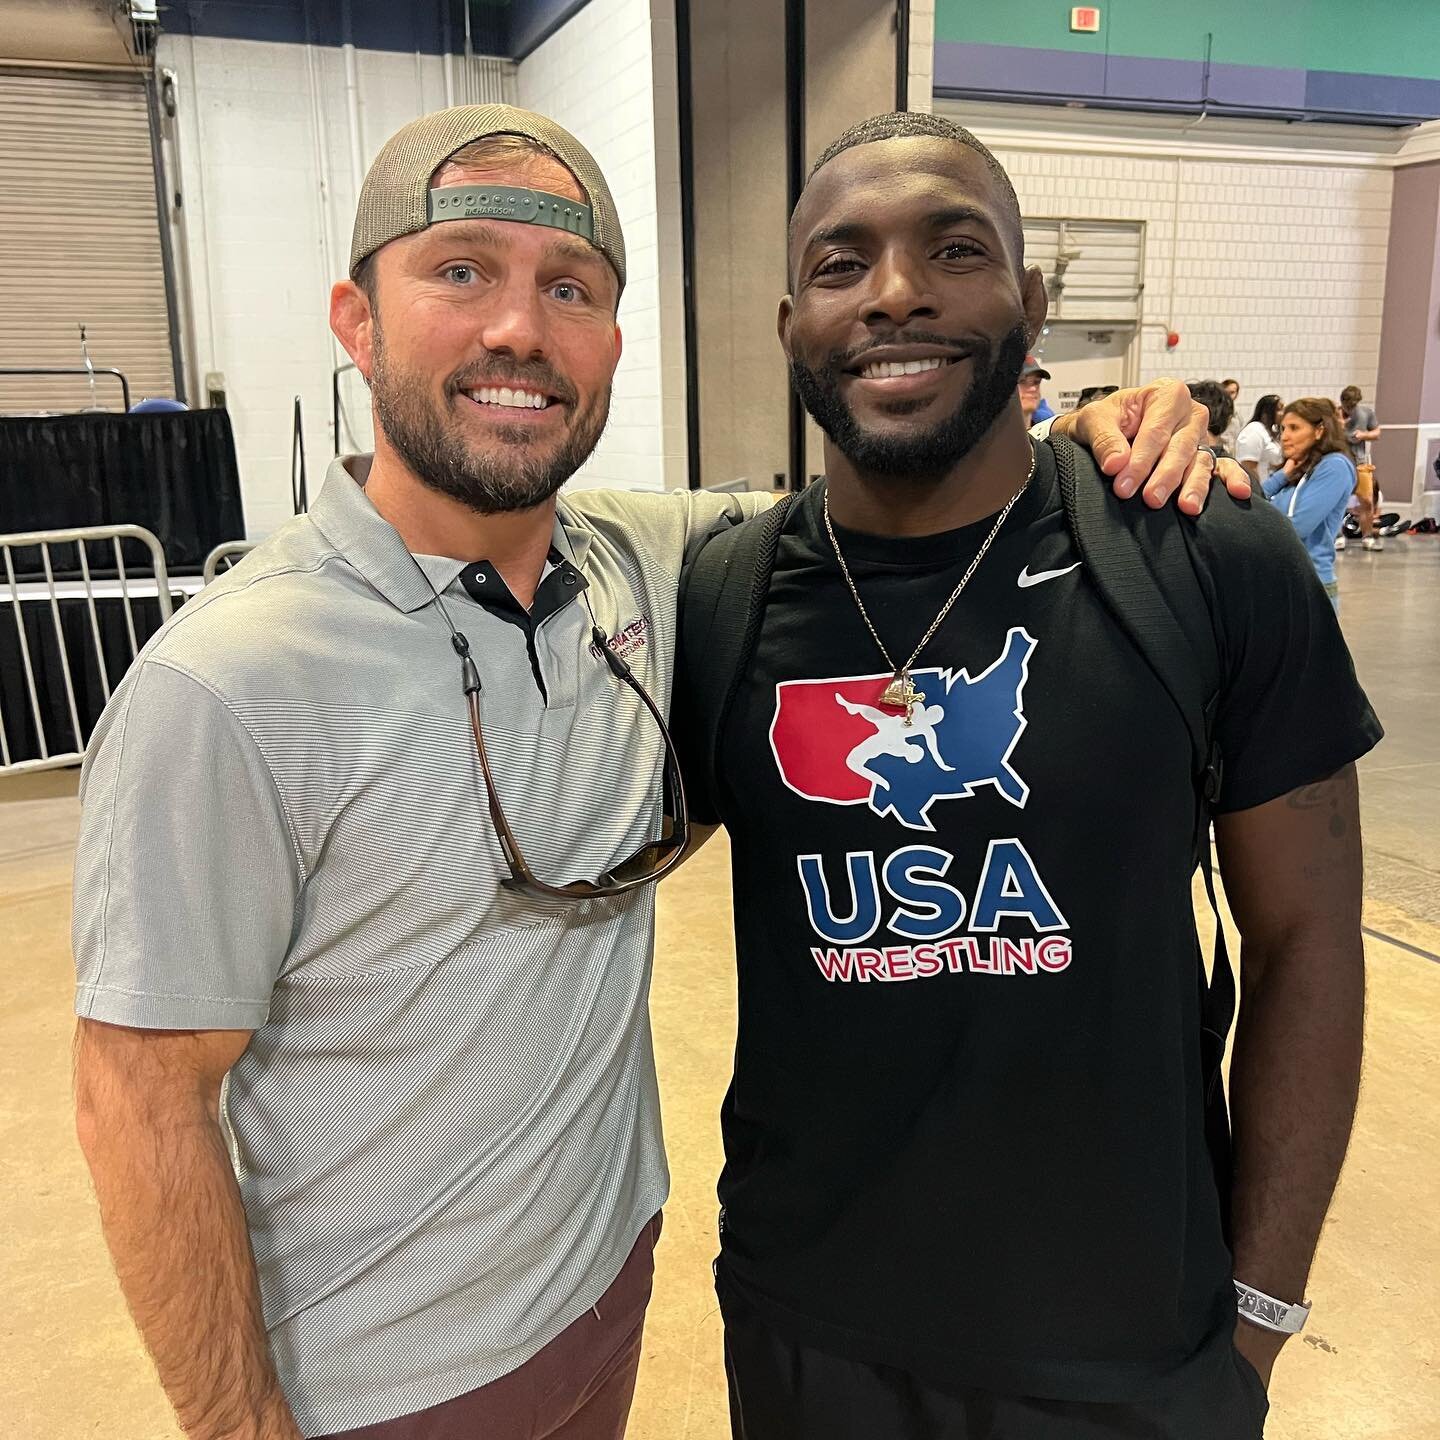 Hey! This Coach Green guy looks familiar 👀

Always great to see and catch up with our guy @whoisjamesg 🙌🤝.
Miss the Greens in the Burg @chandgreen!